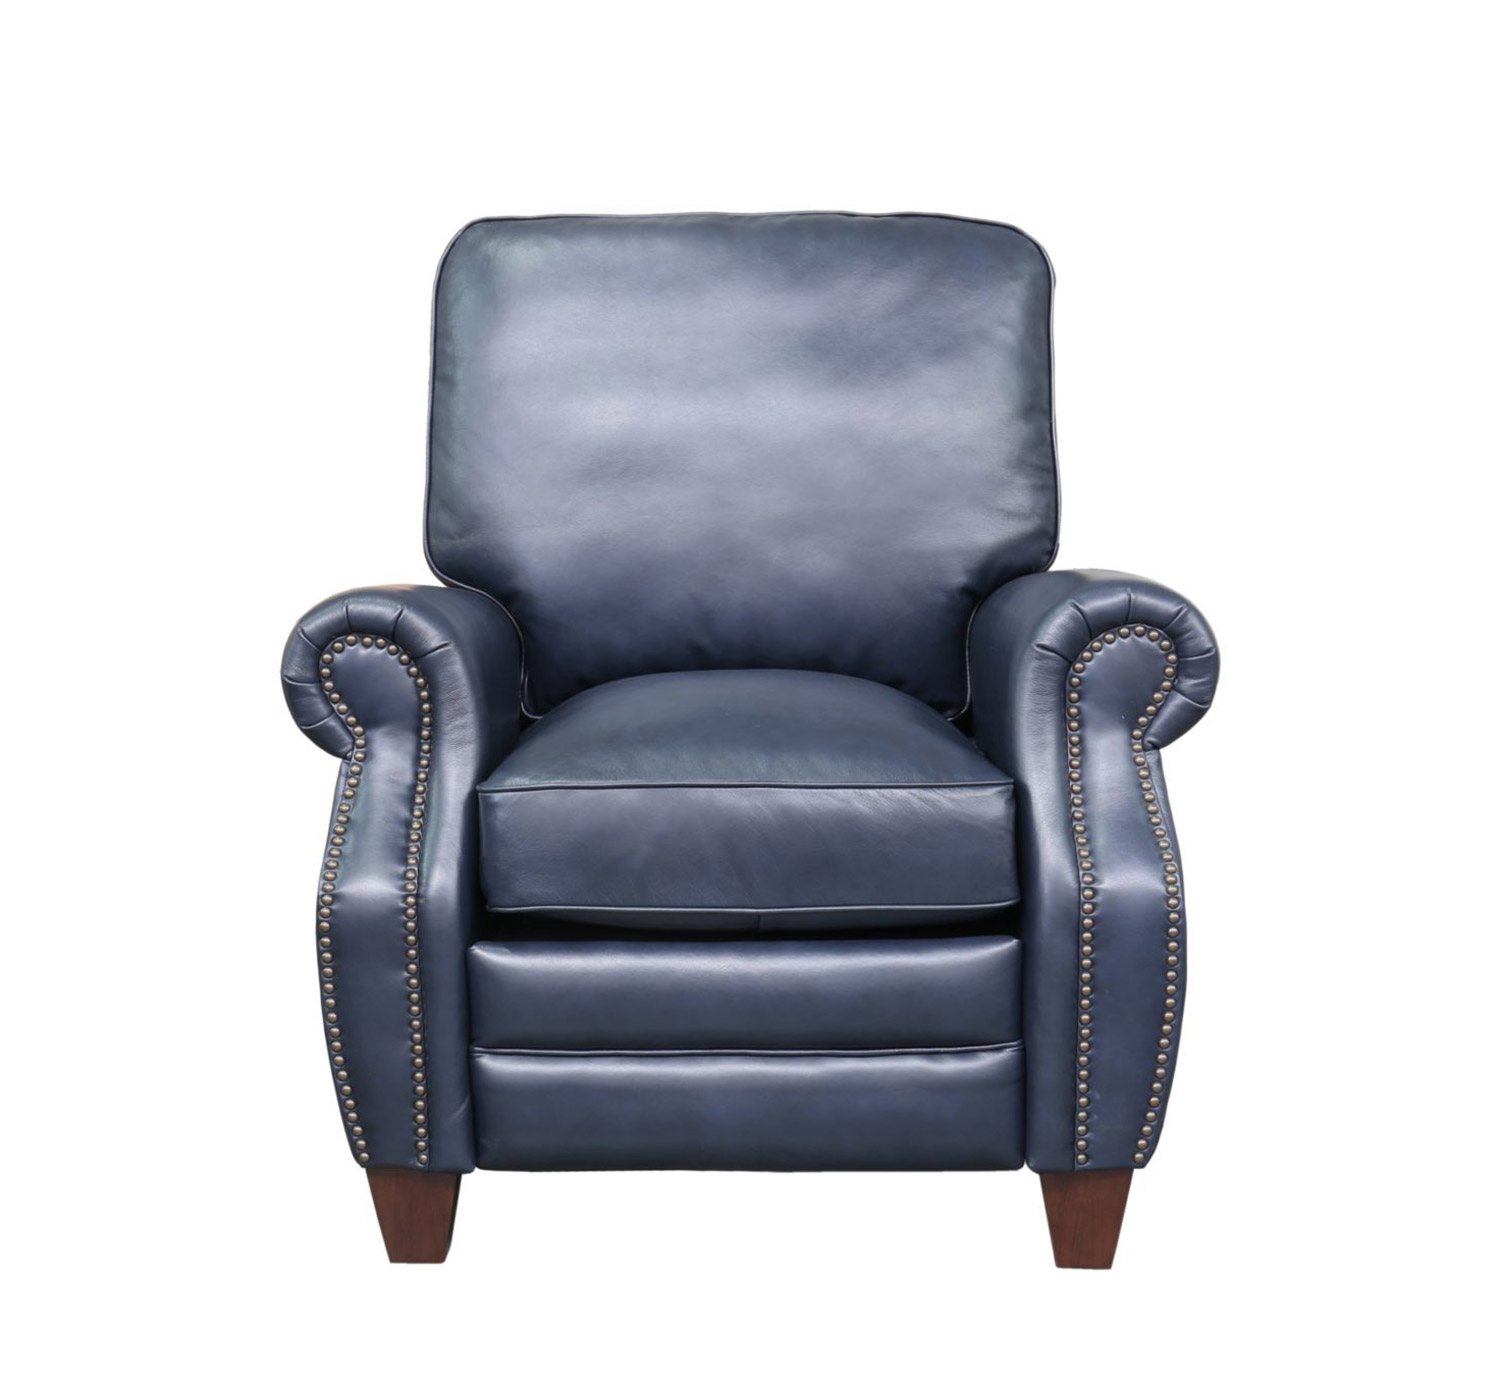 Barcalounger Briarwood Recliner Chair - Shoreham Blue/all leather